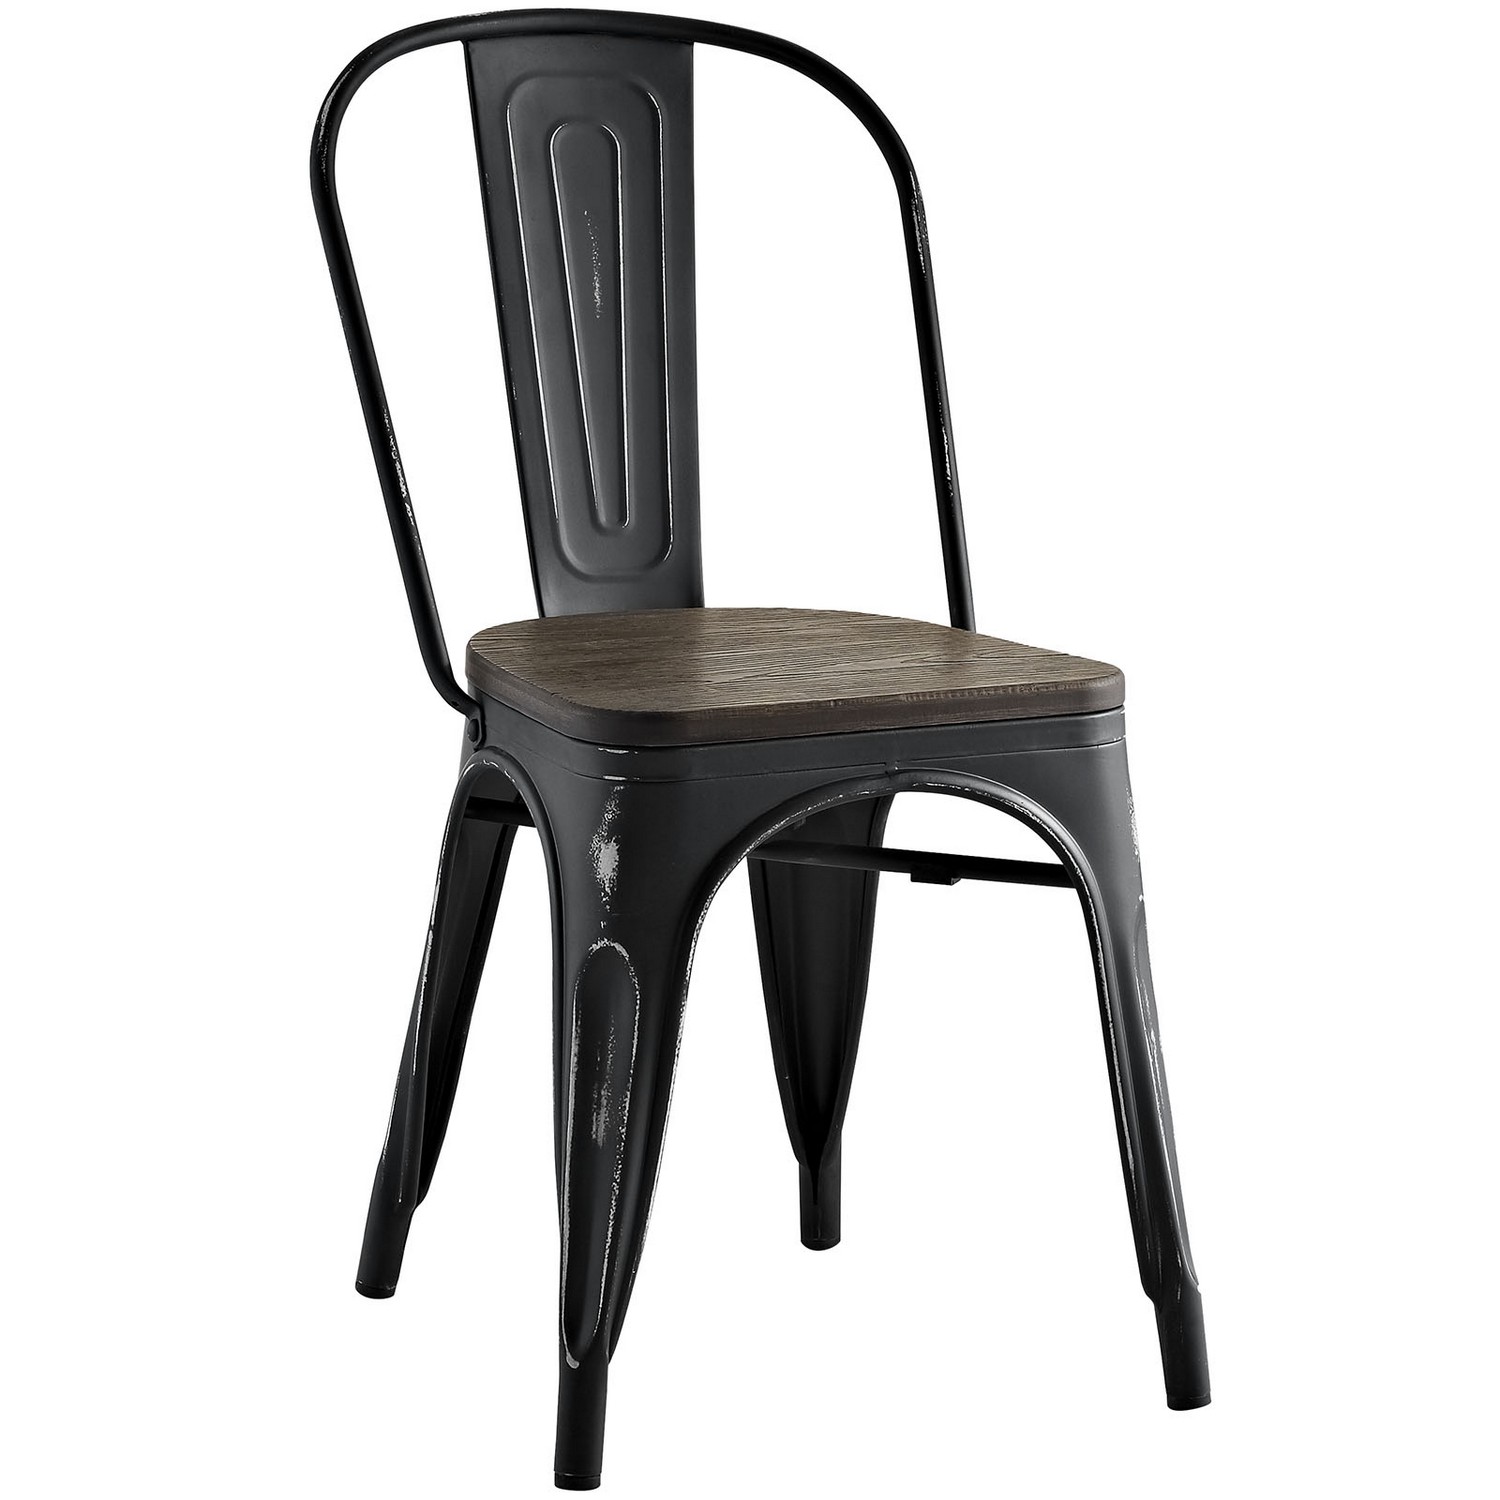 Modway Promenade Bamboo Side Chair - Black